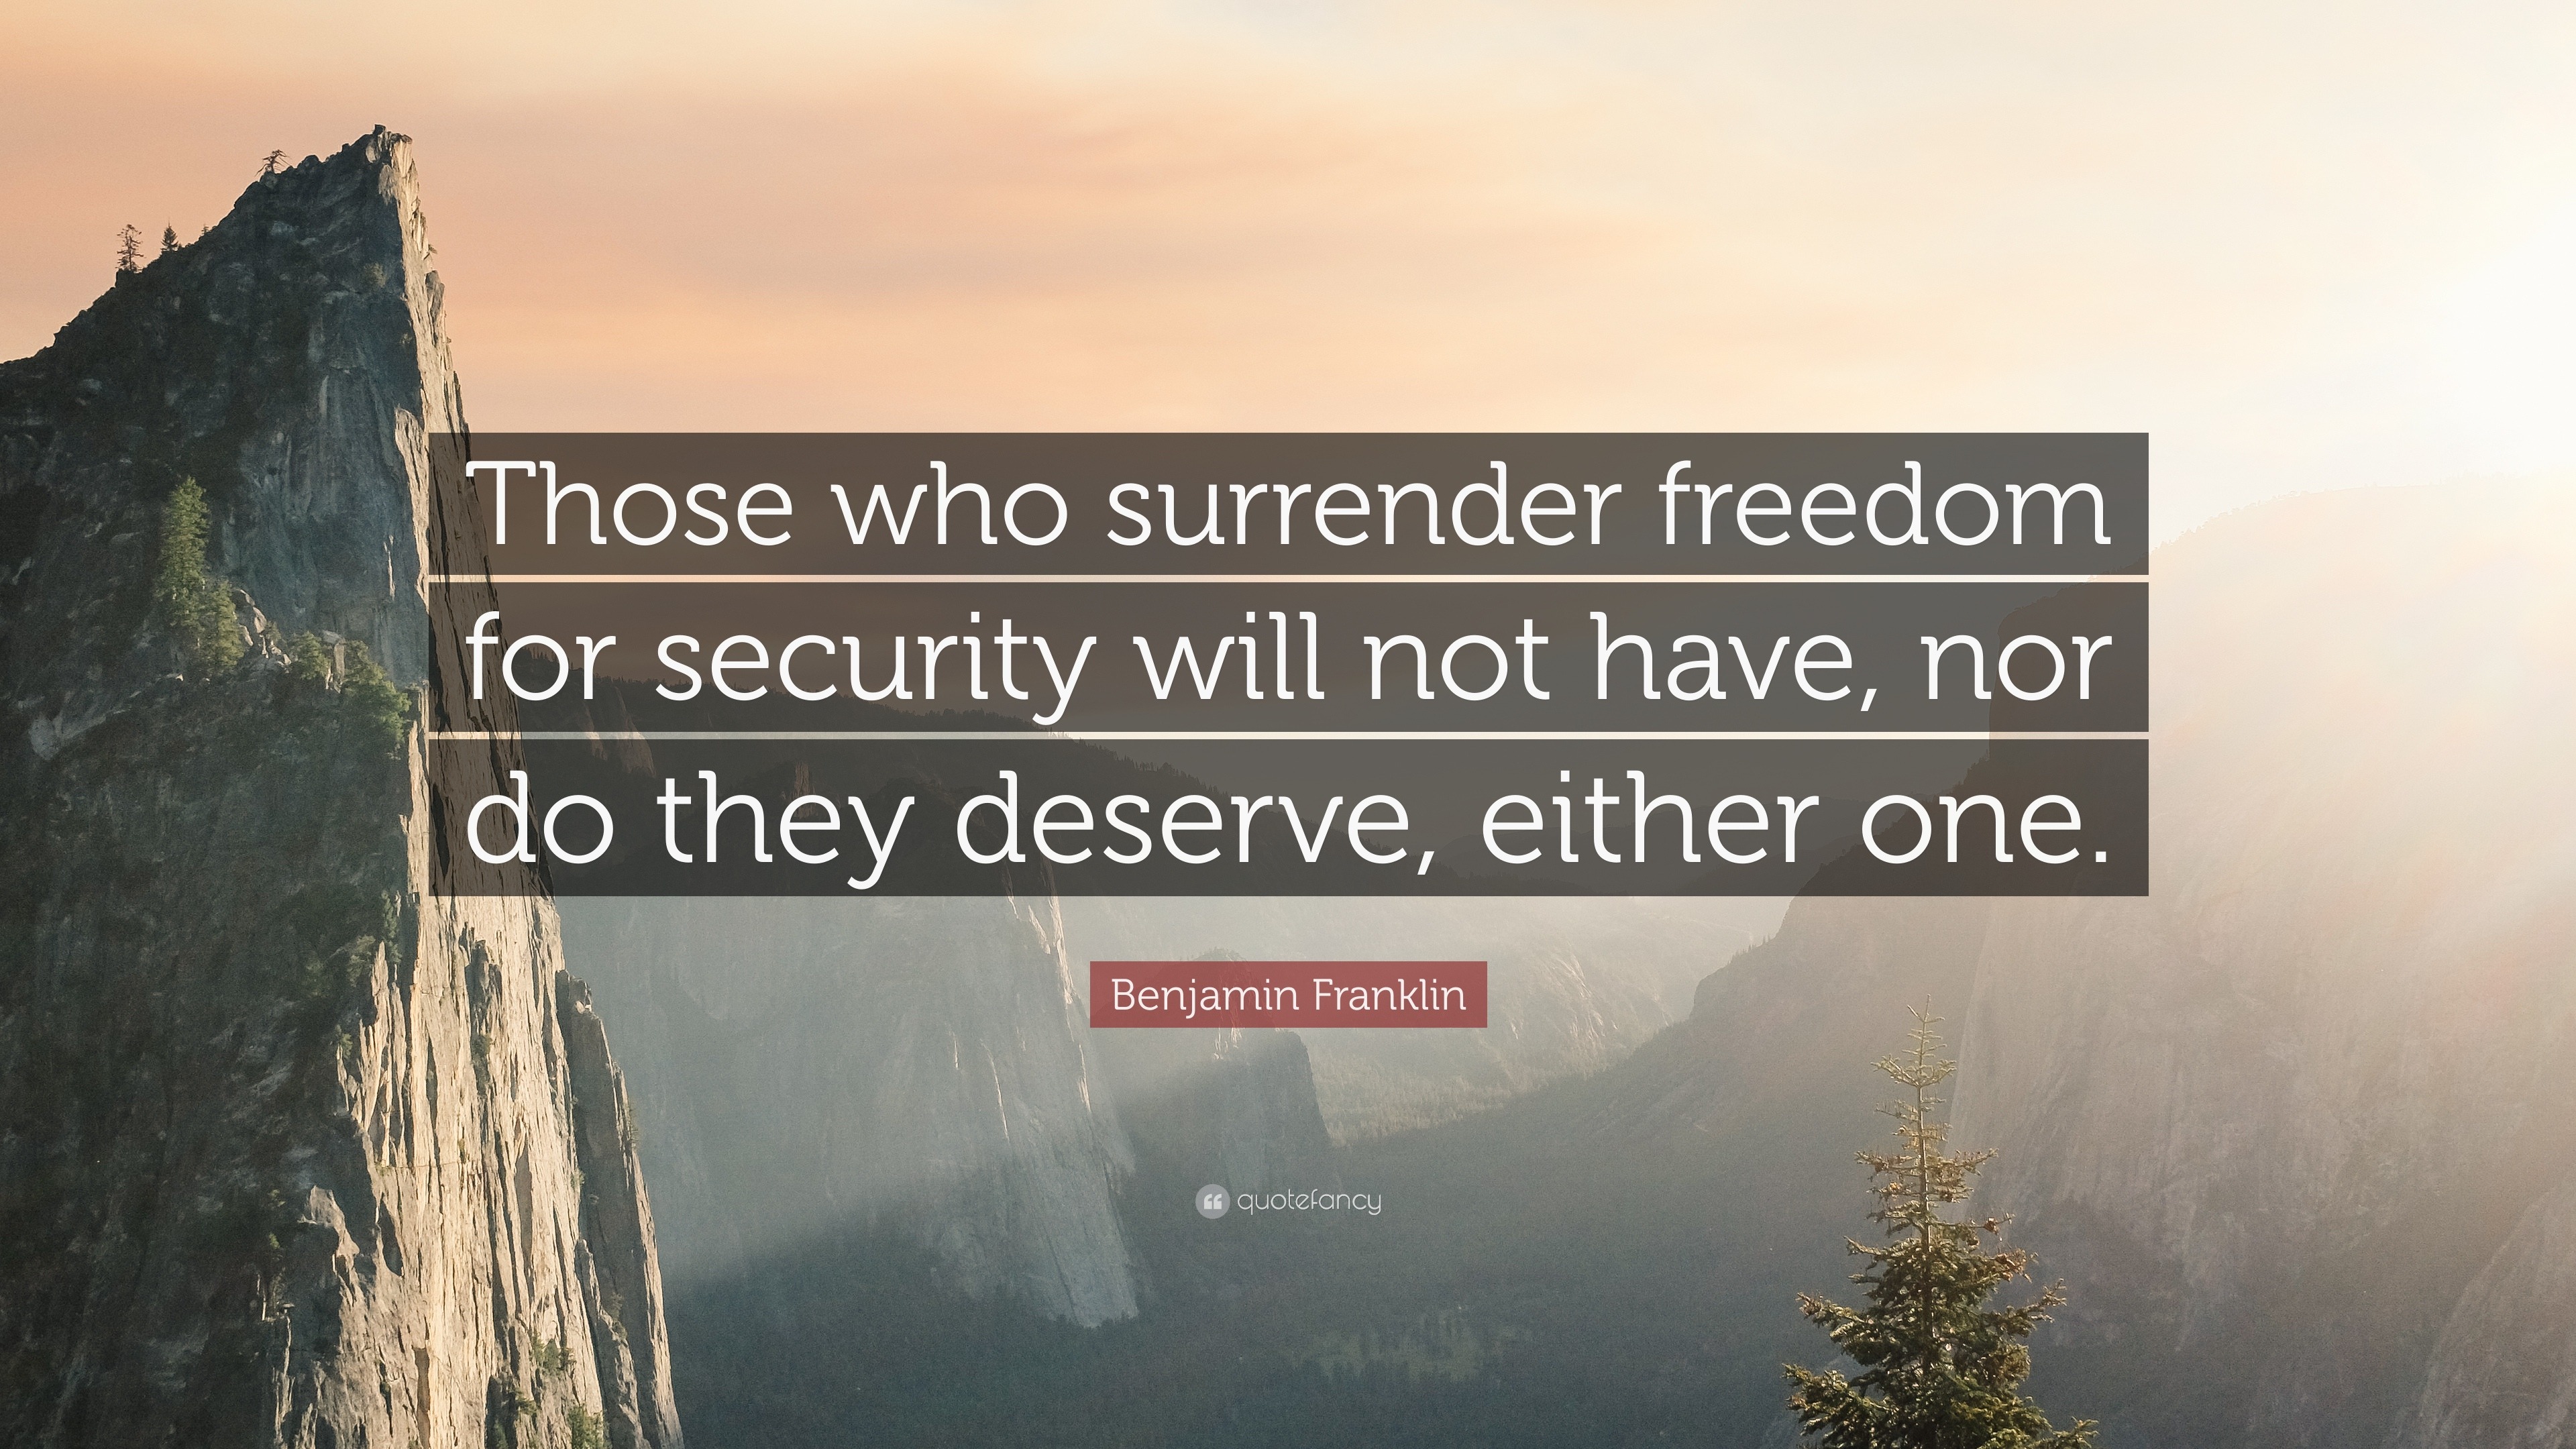 Benjamin Franklin Quote: “Those who surrender freedom for security will